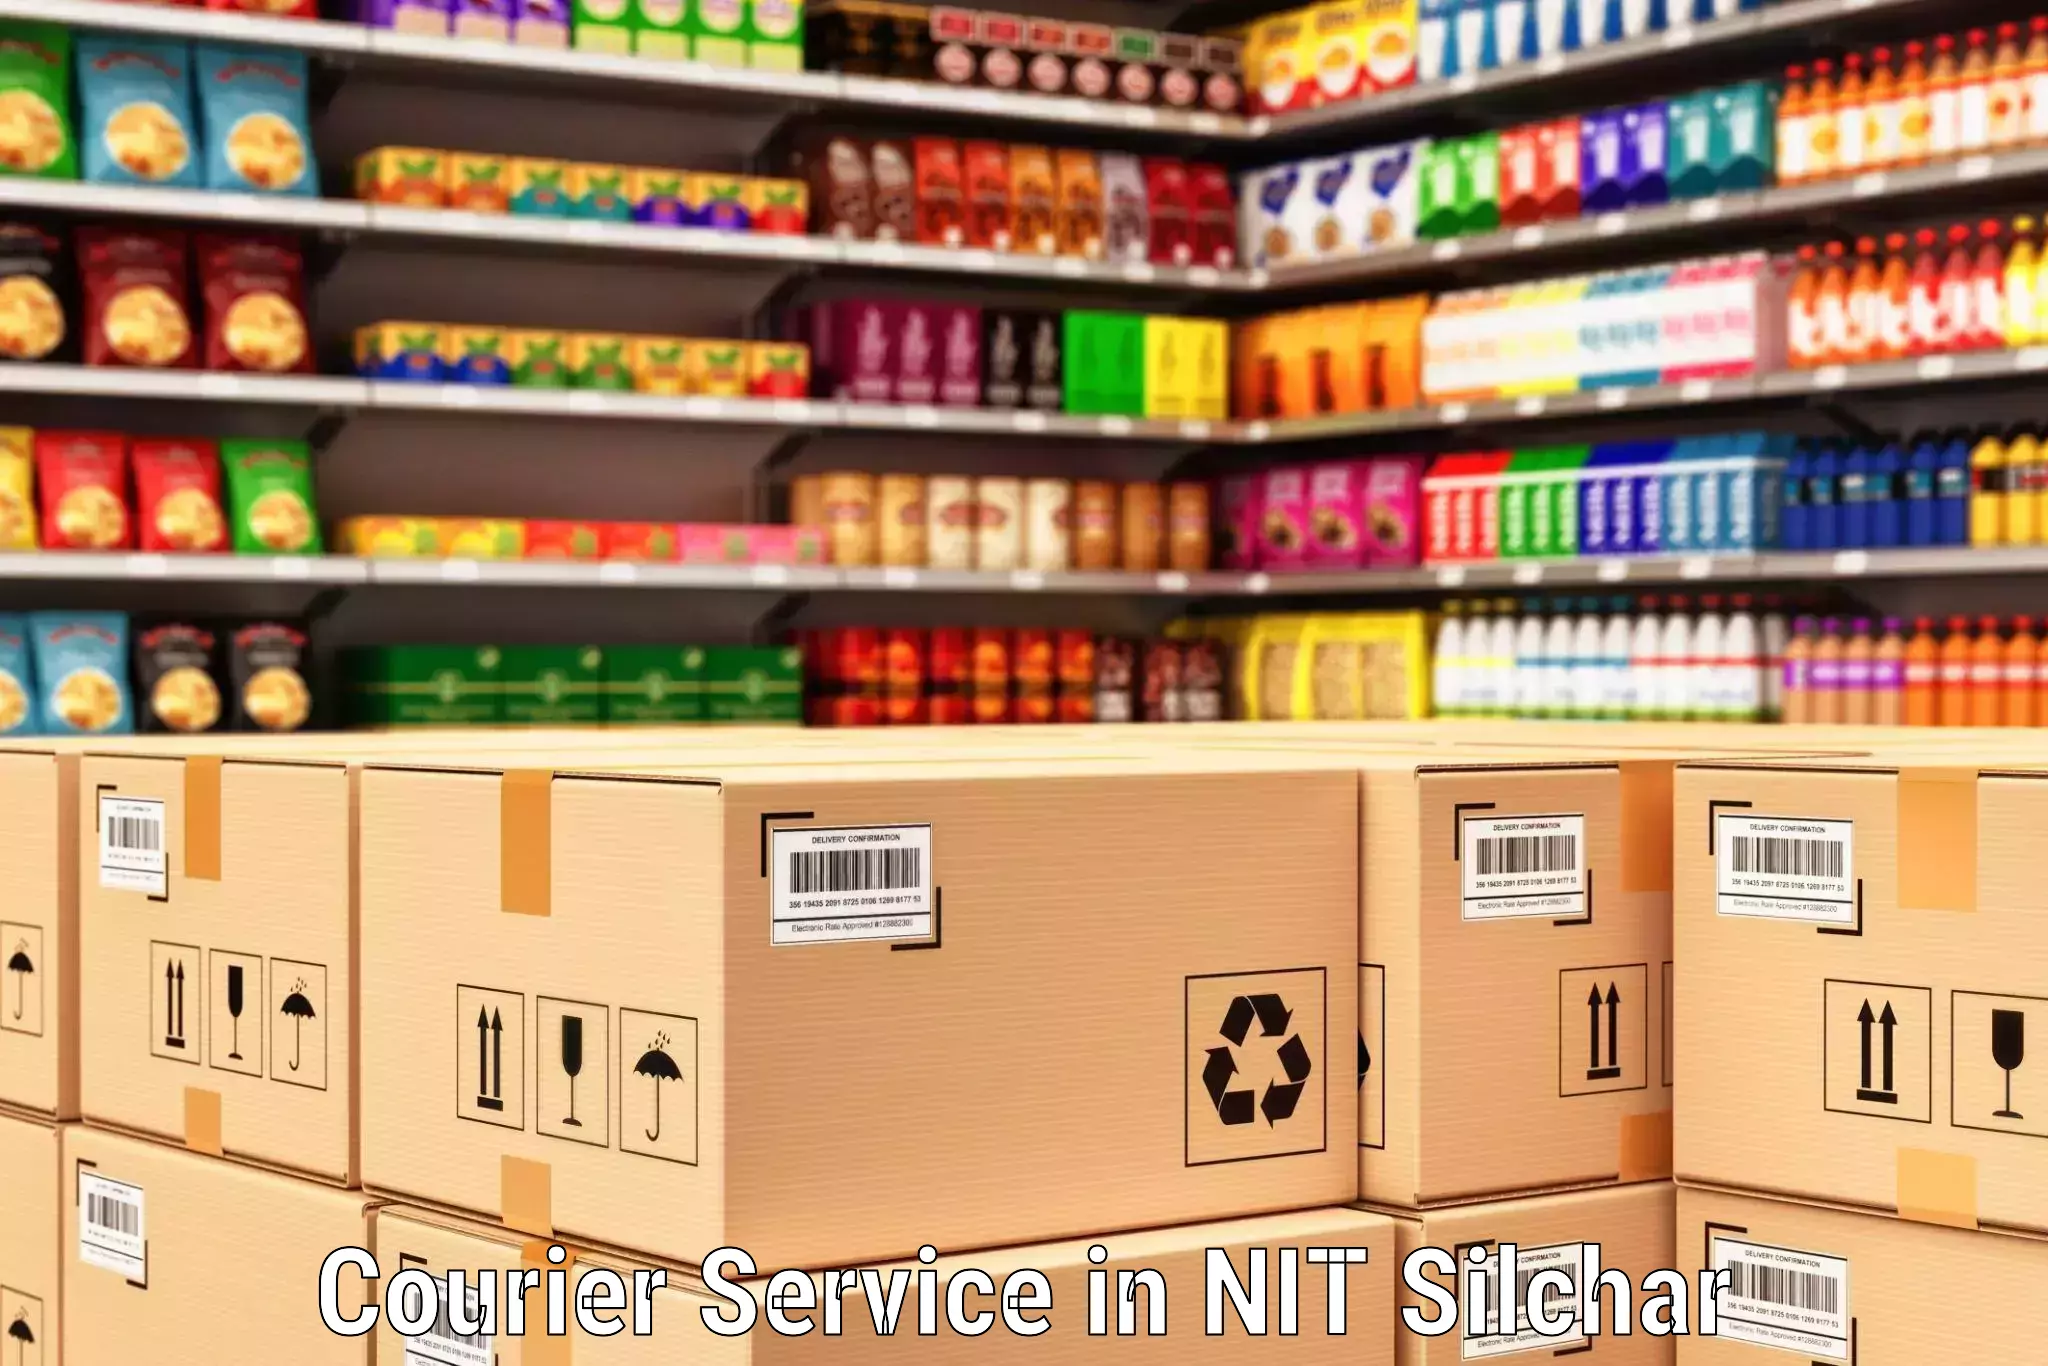 Enhanced shipping experience in NIT Silchar